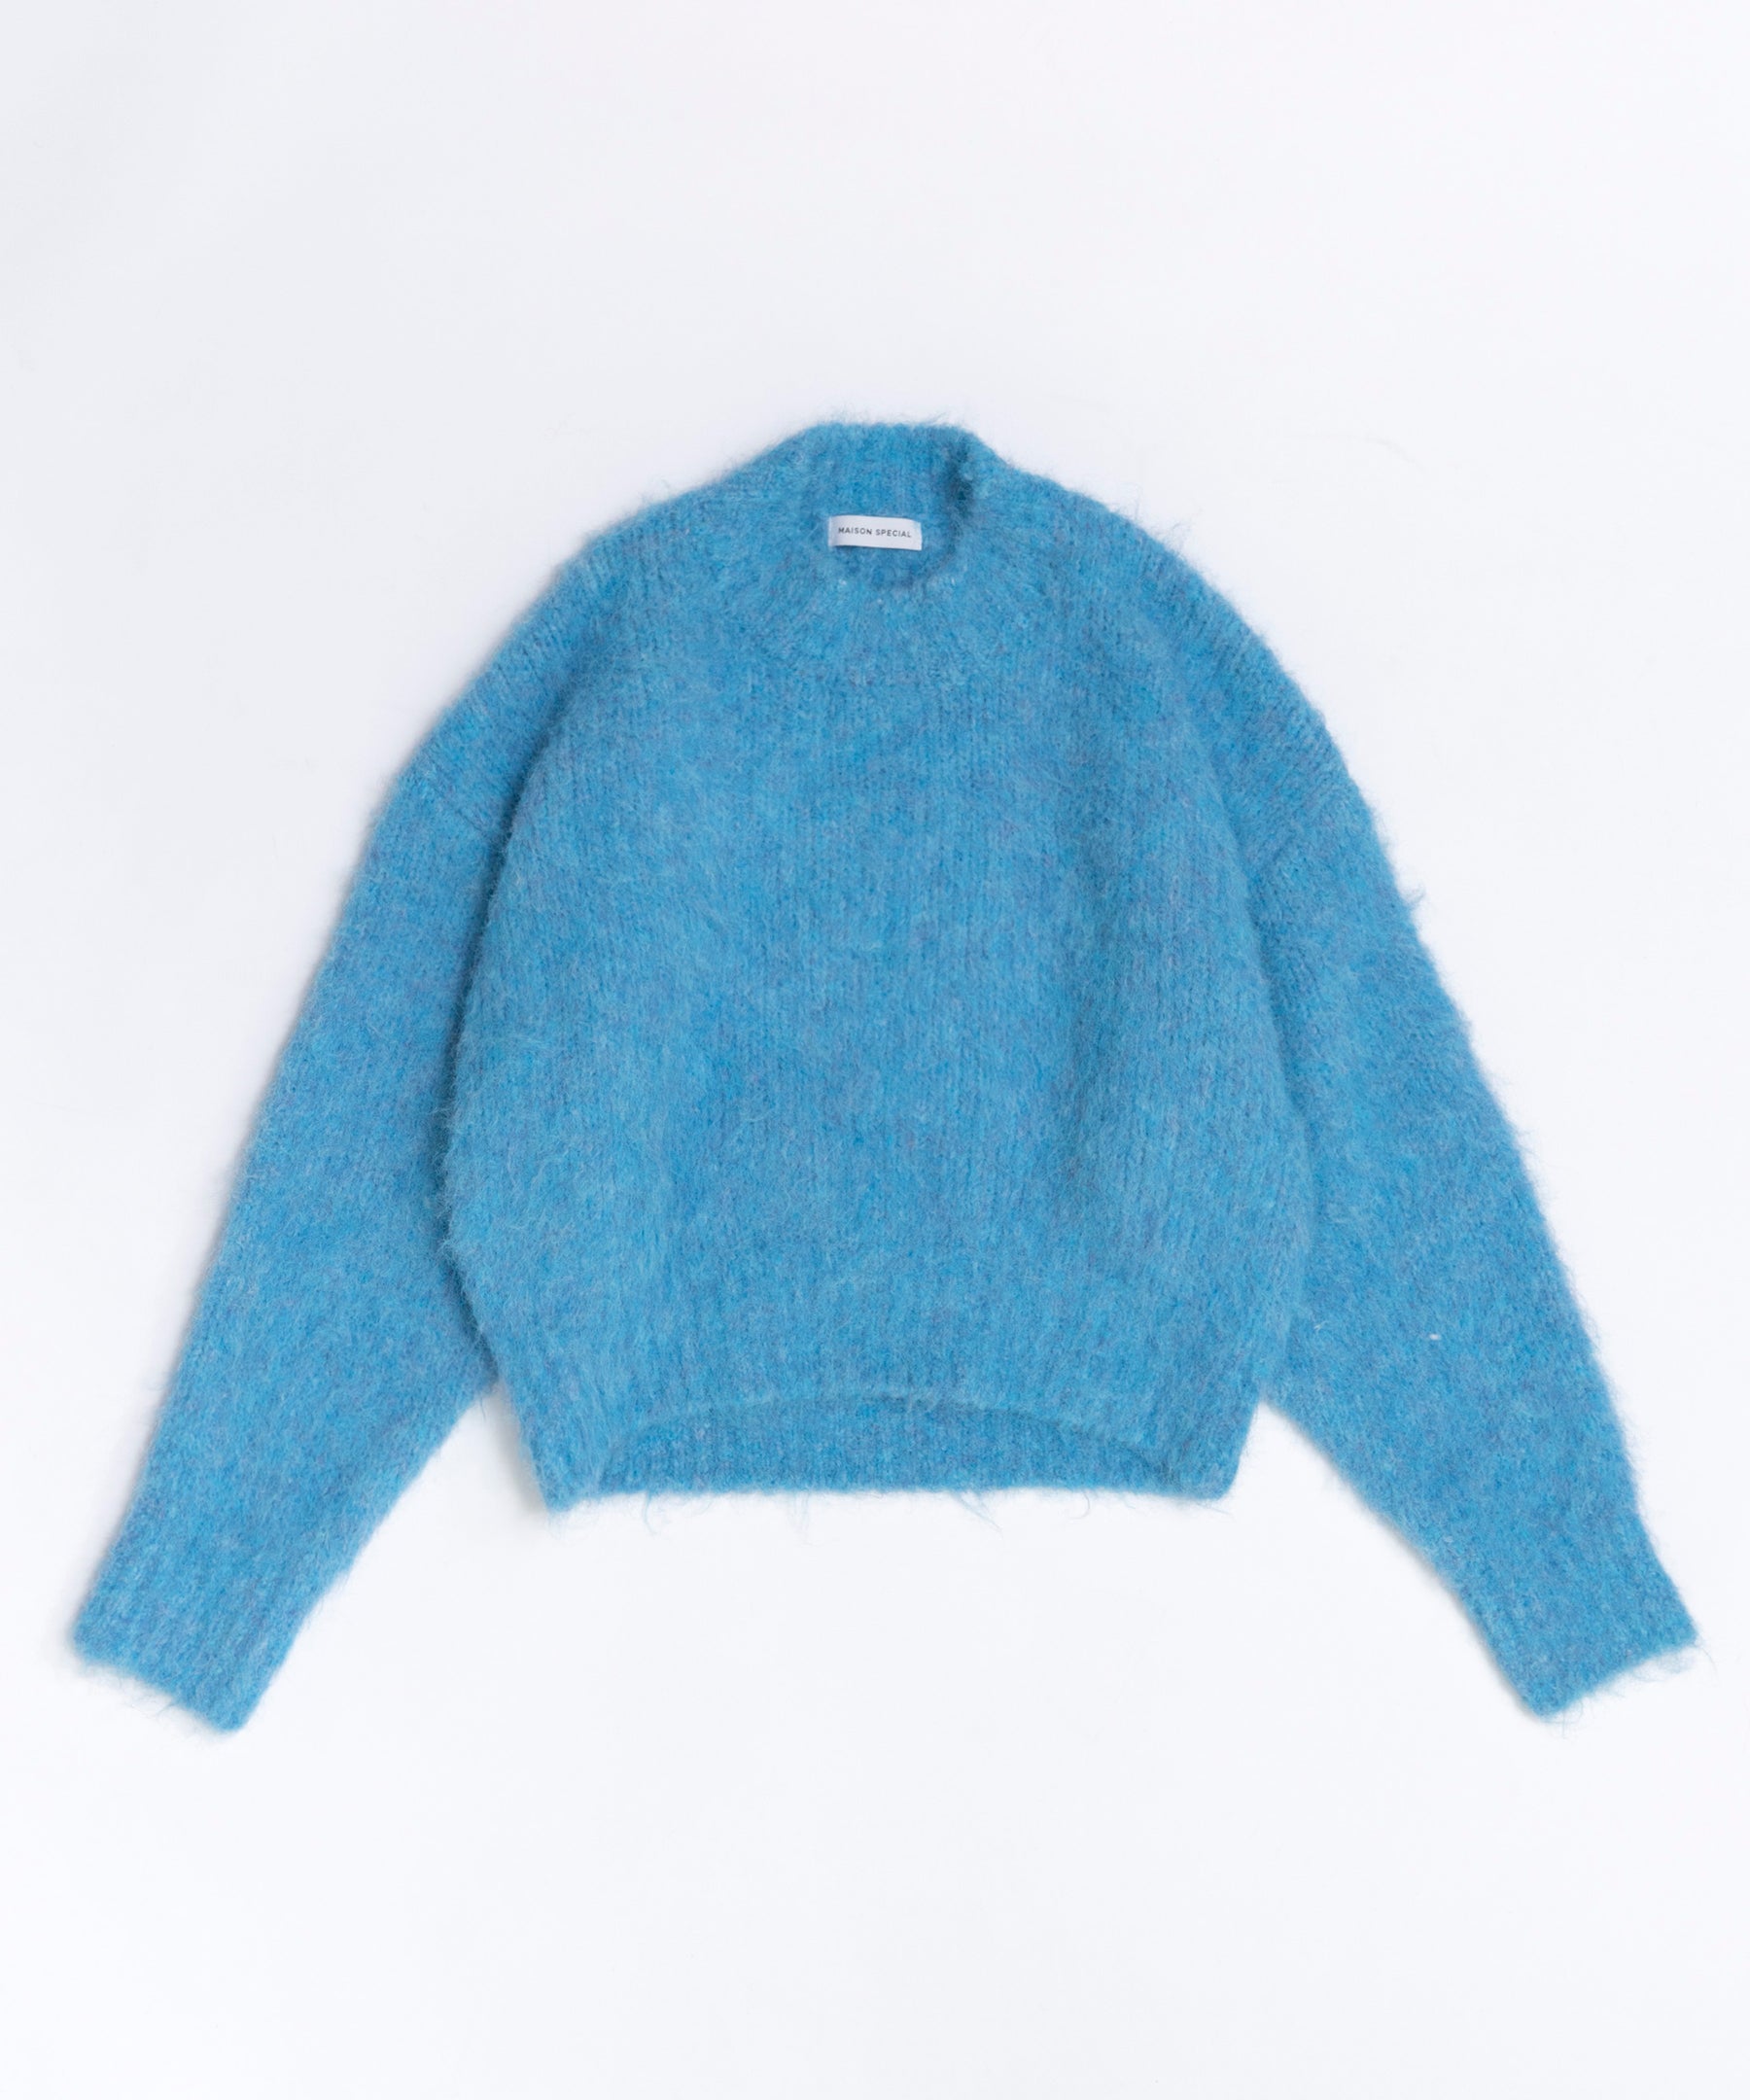 MAISON SPECIAL Many Color Shaggy Knit風合いのあるシャギーを使用